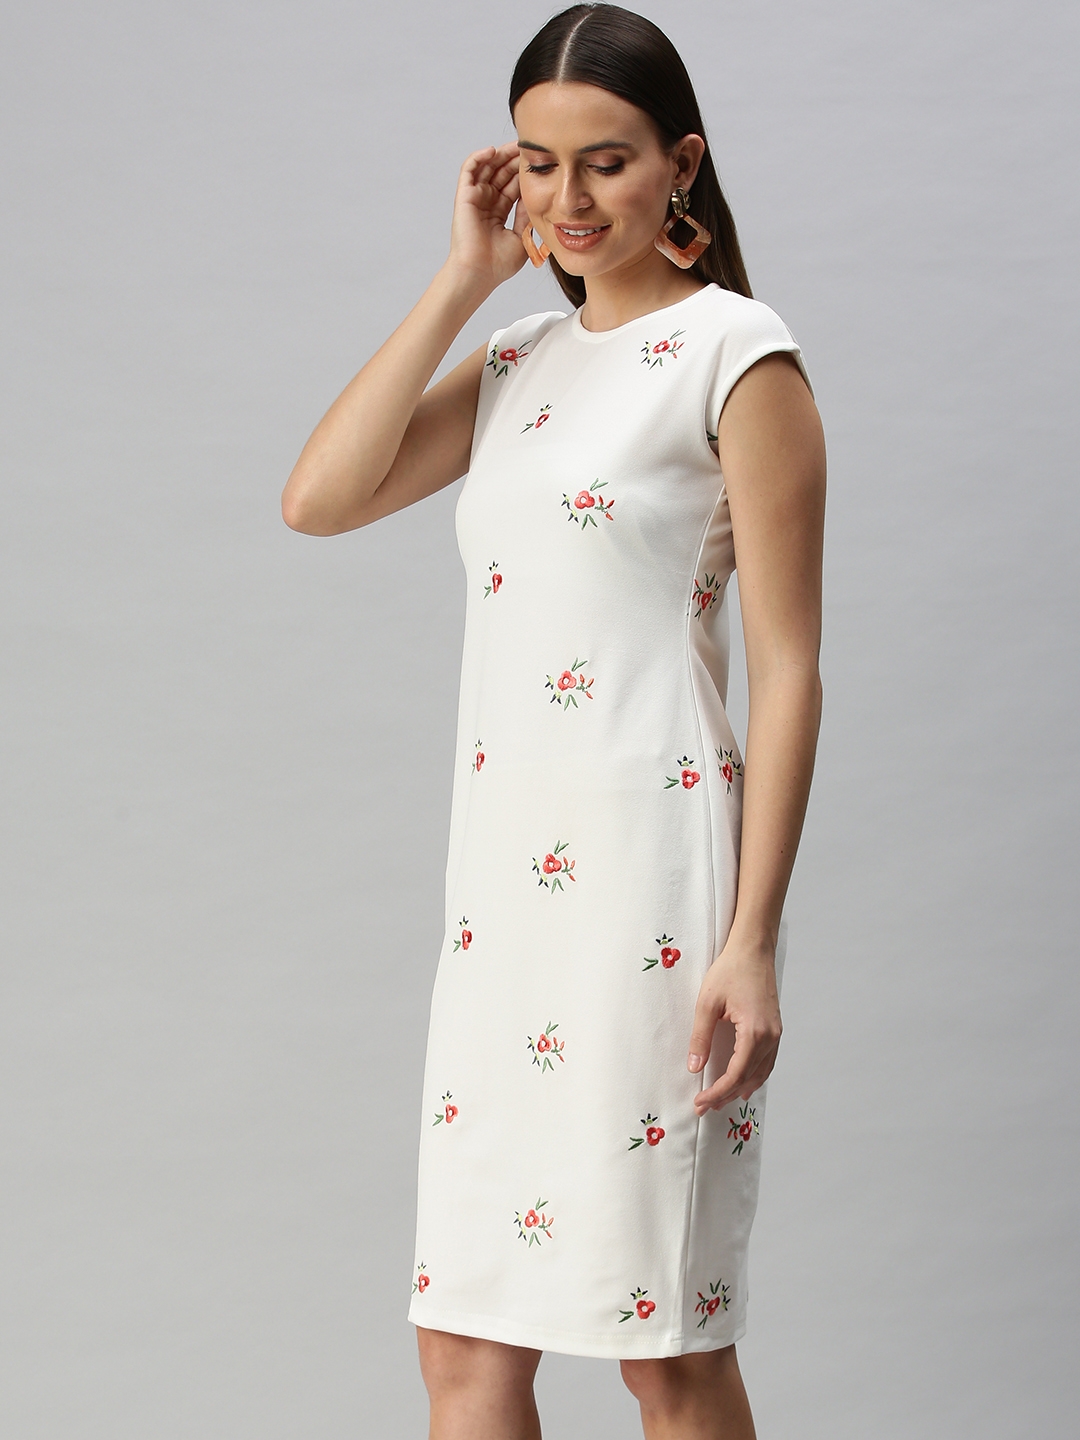 Women's White Polyester Embroidered Dresses